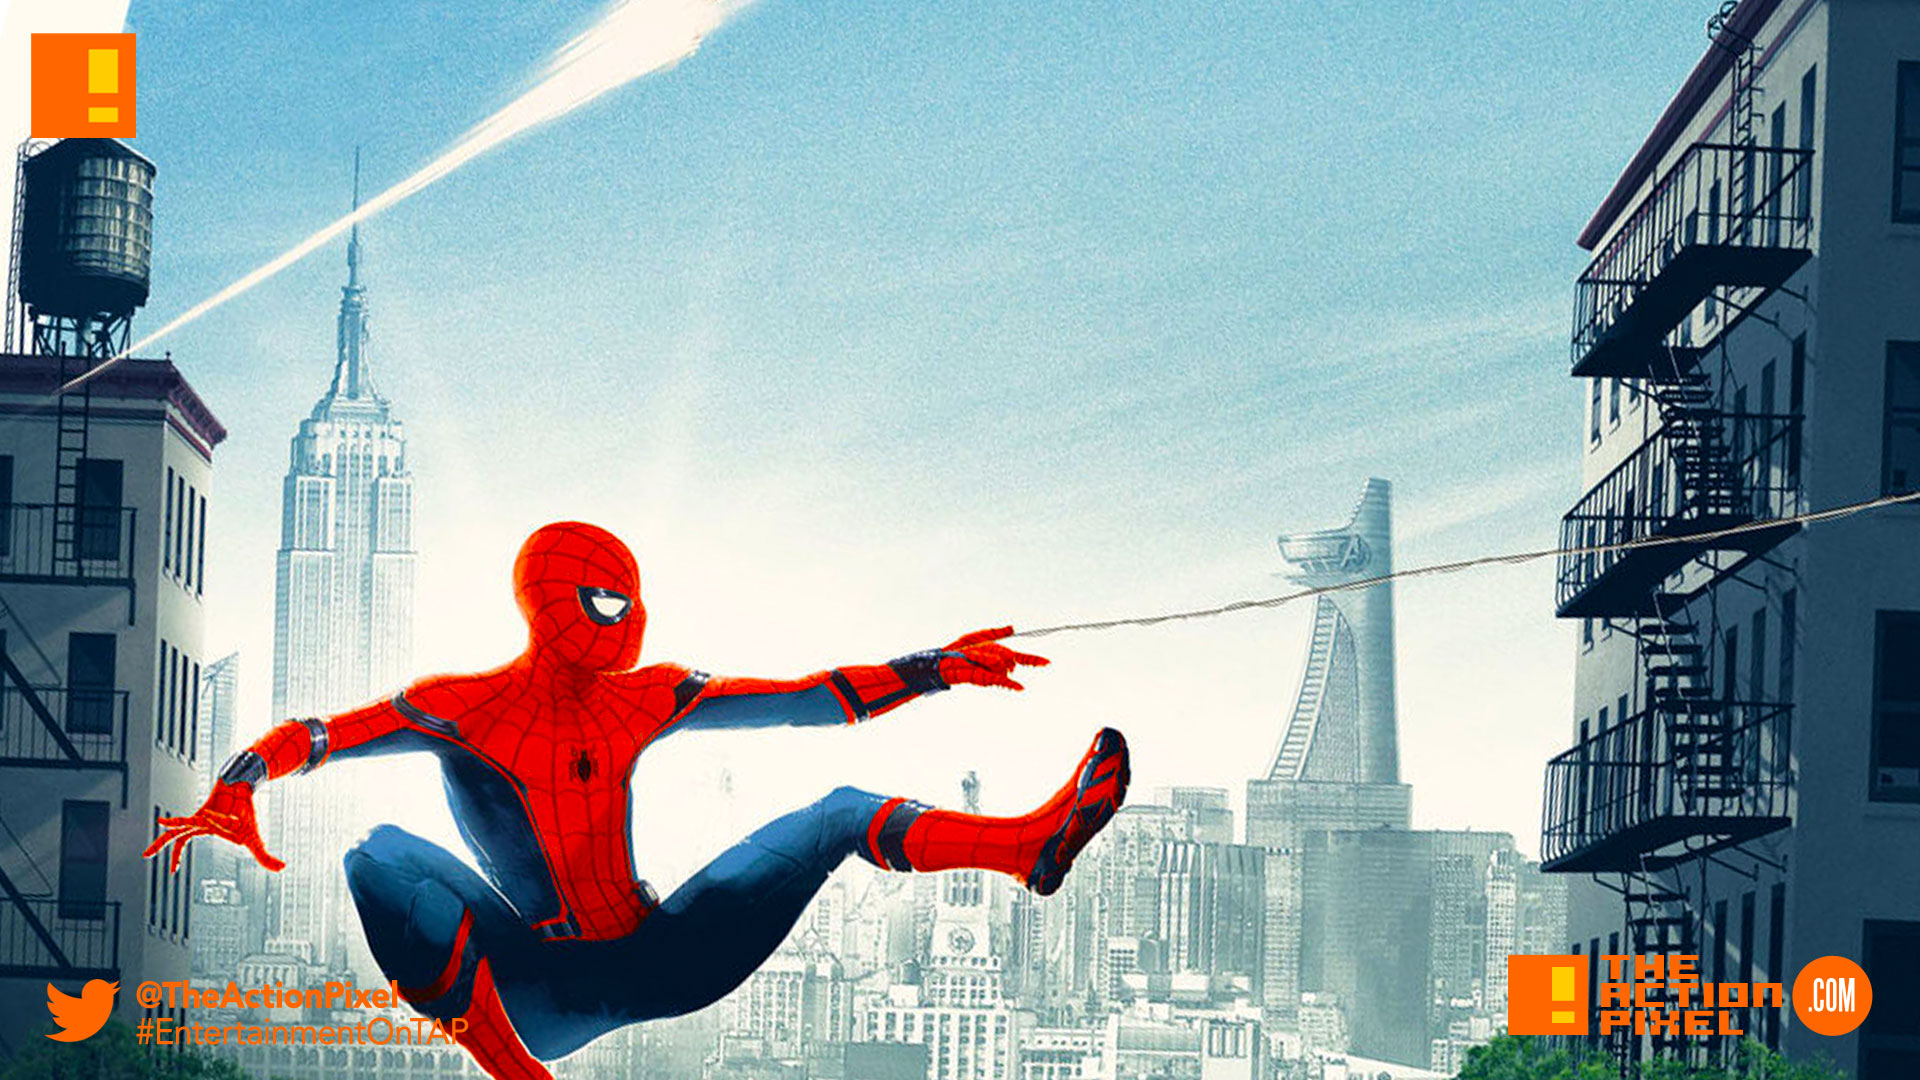 spider-man, spider-man homecoming, the action pixel, marvel,sony, sony pictures, tom holland, iron man, peter parker, vulture, tony stark, entertainment on tap, poster, iron man